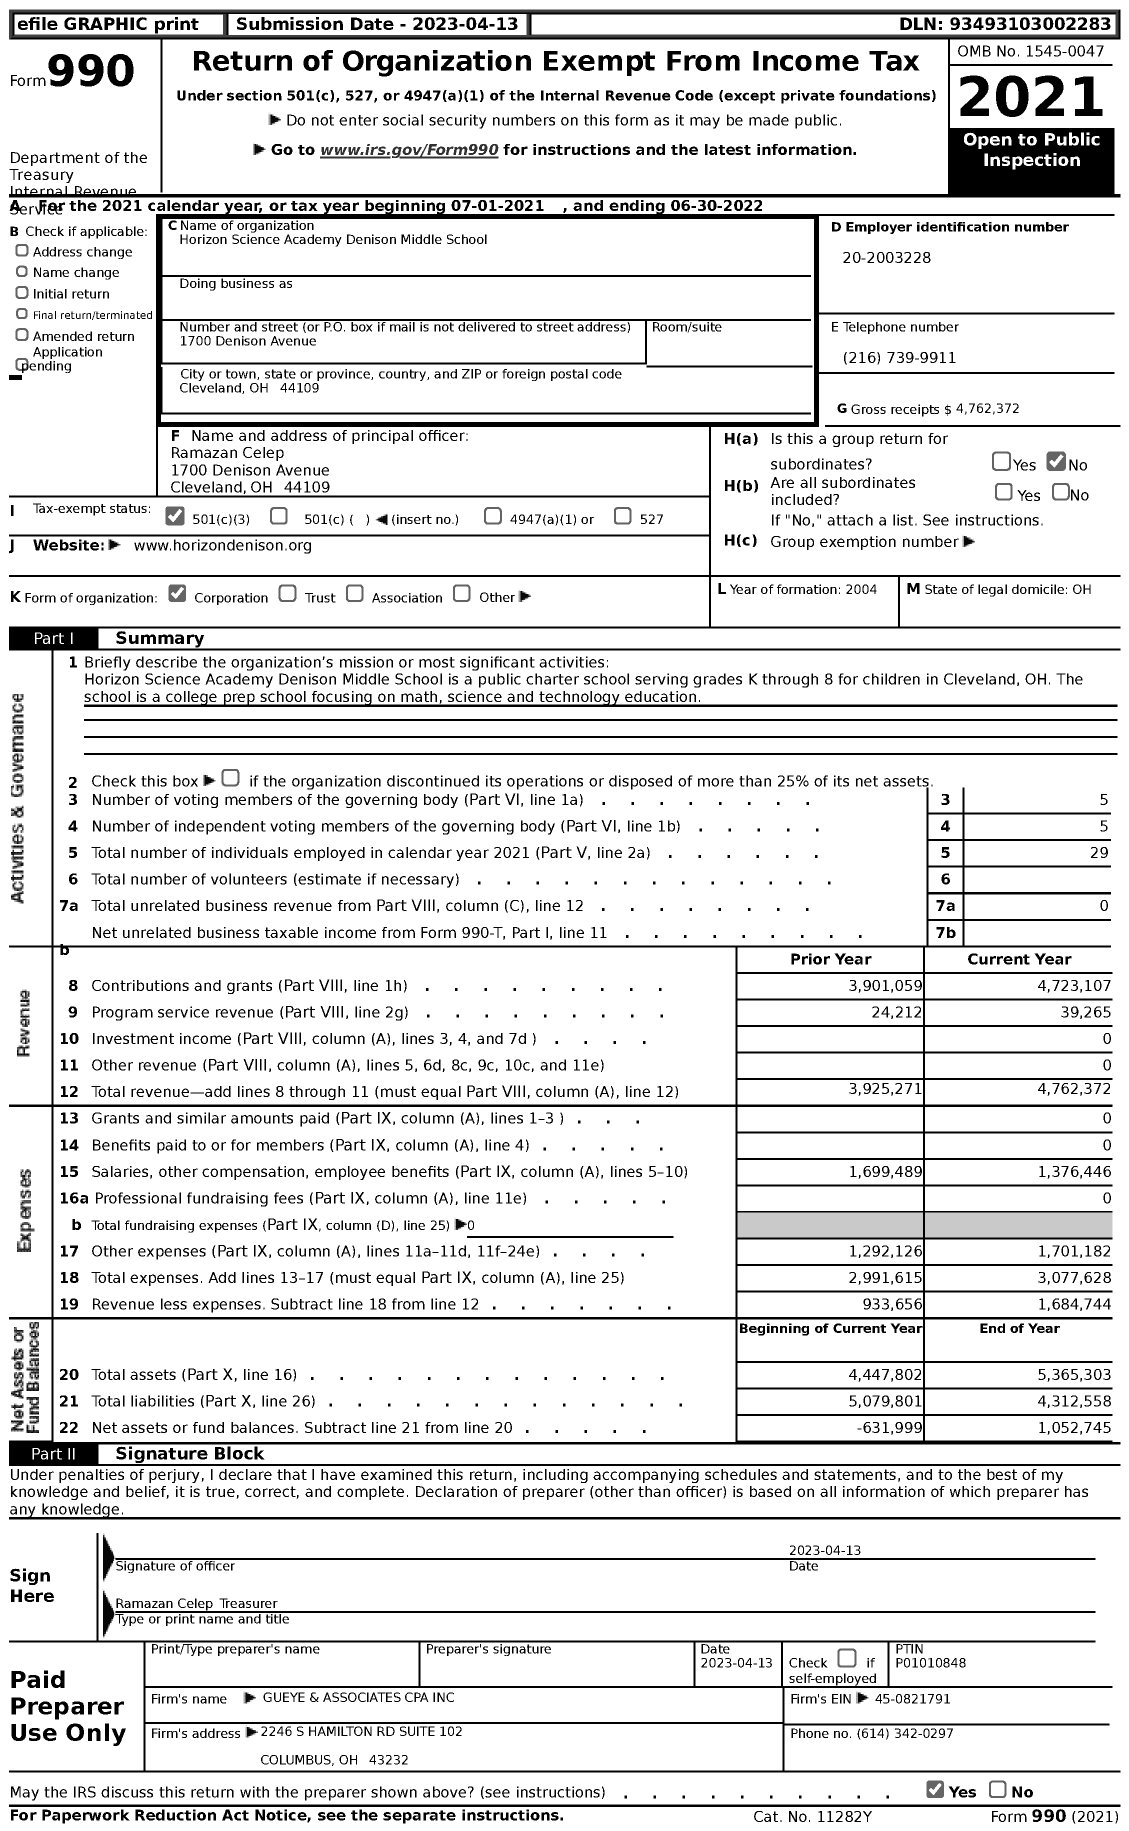 Image of first page of 2021 Form 990 for Horizon Science Academy Denison Middle School